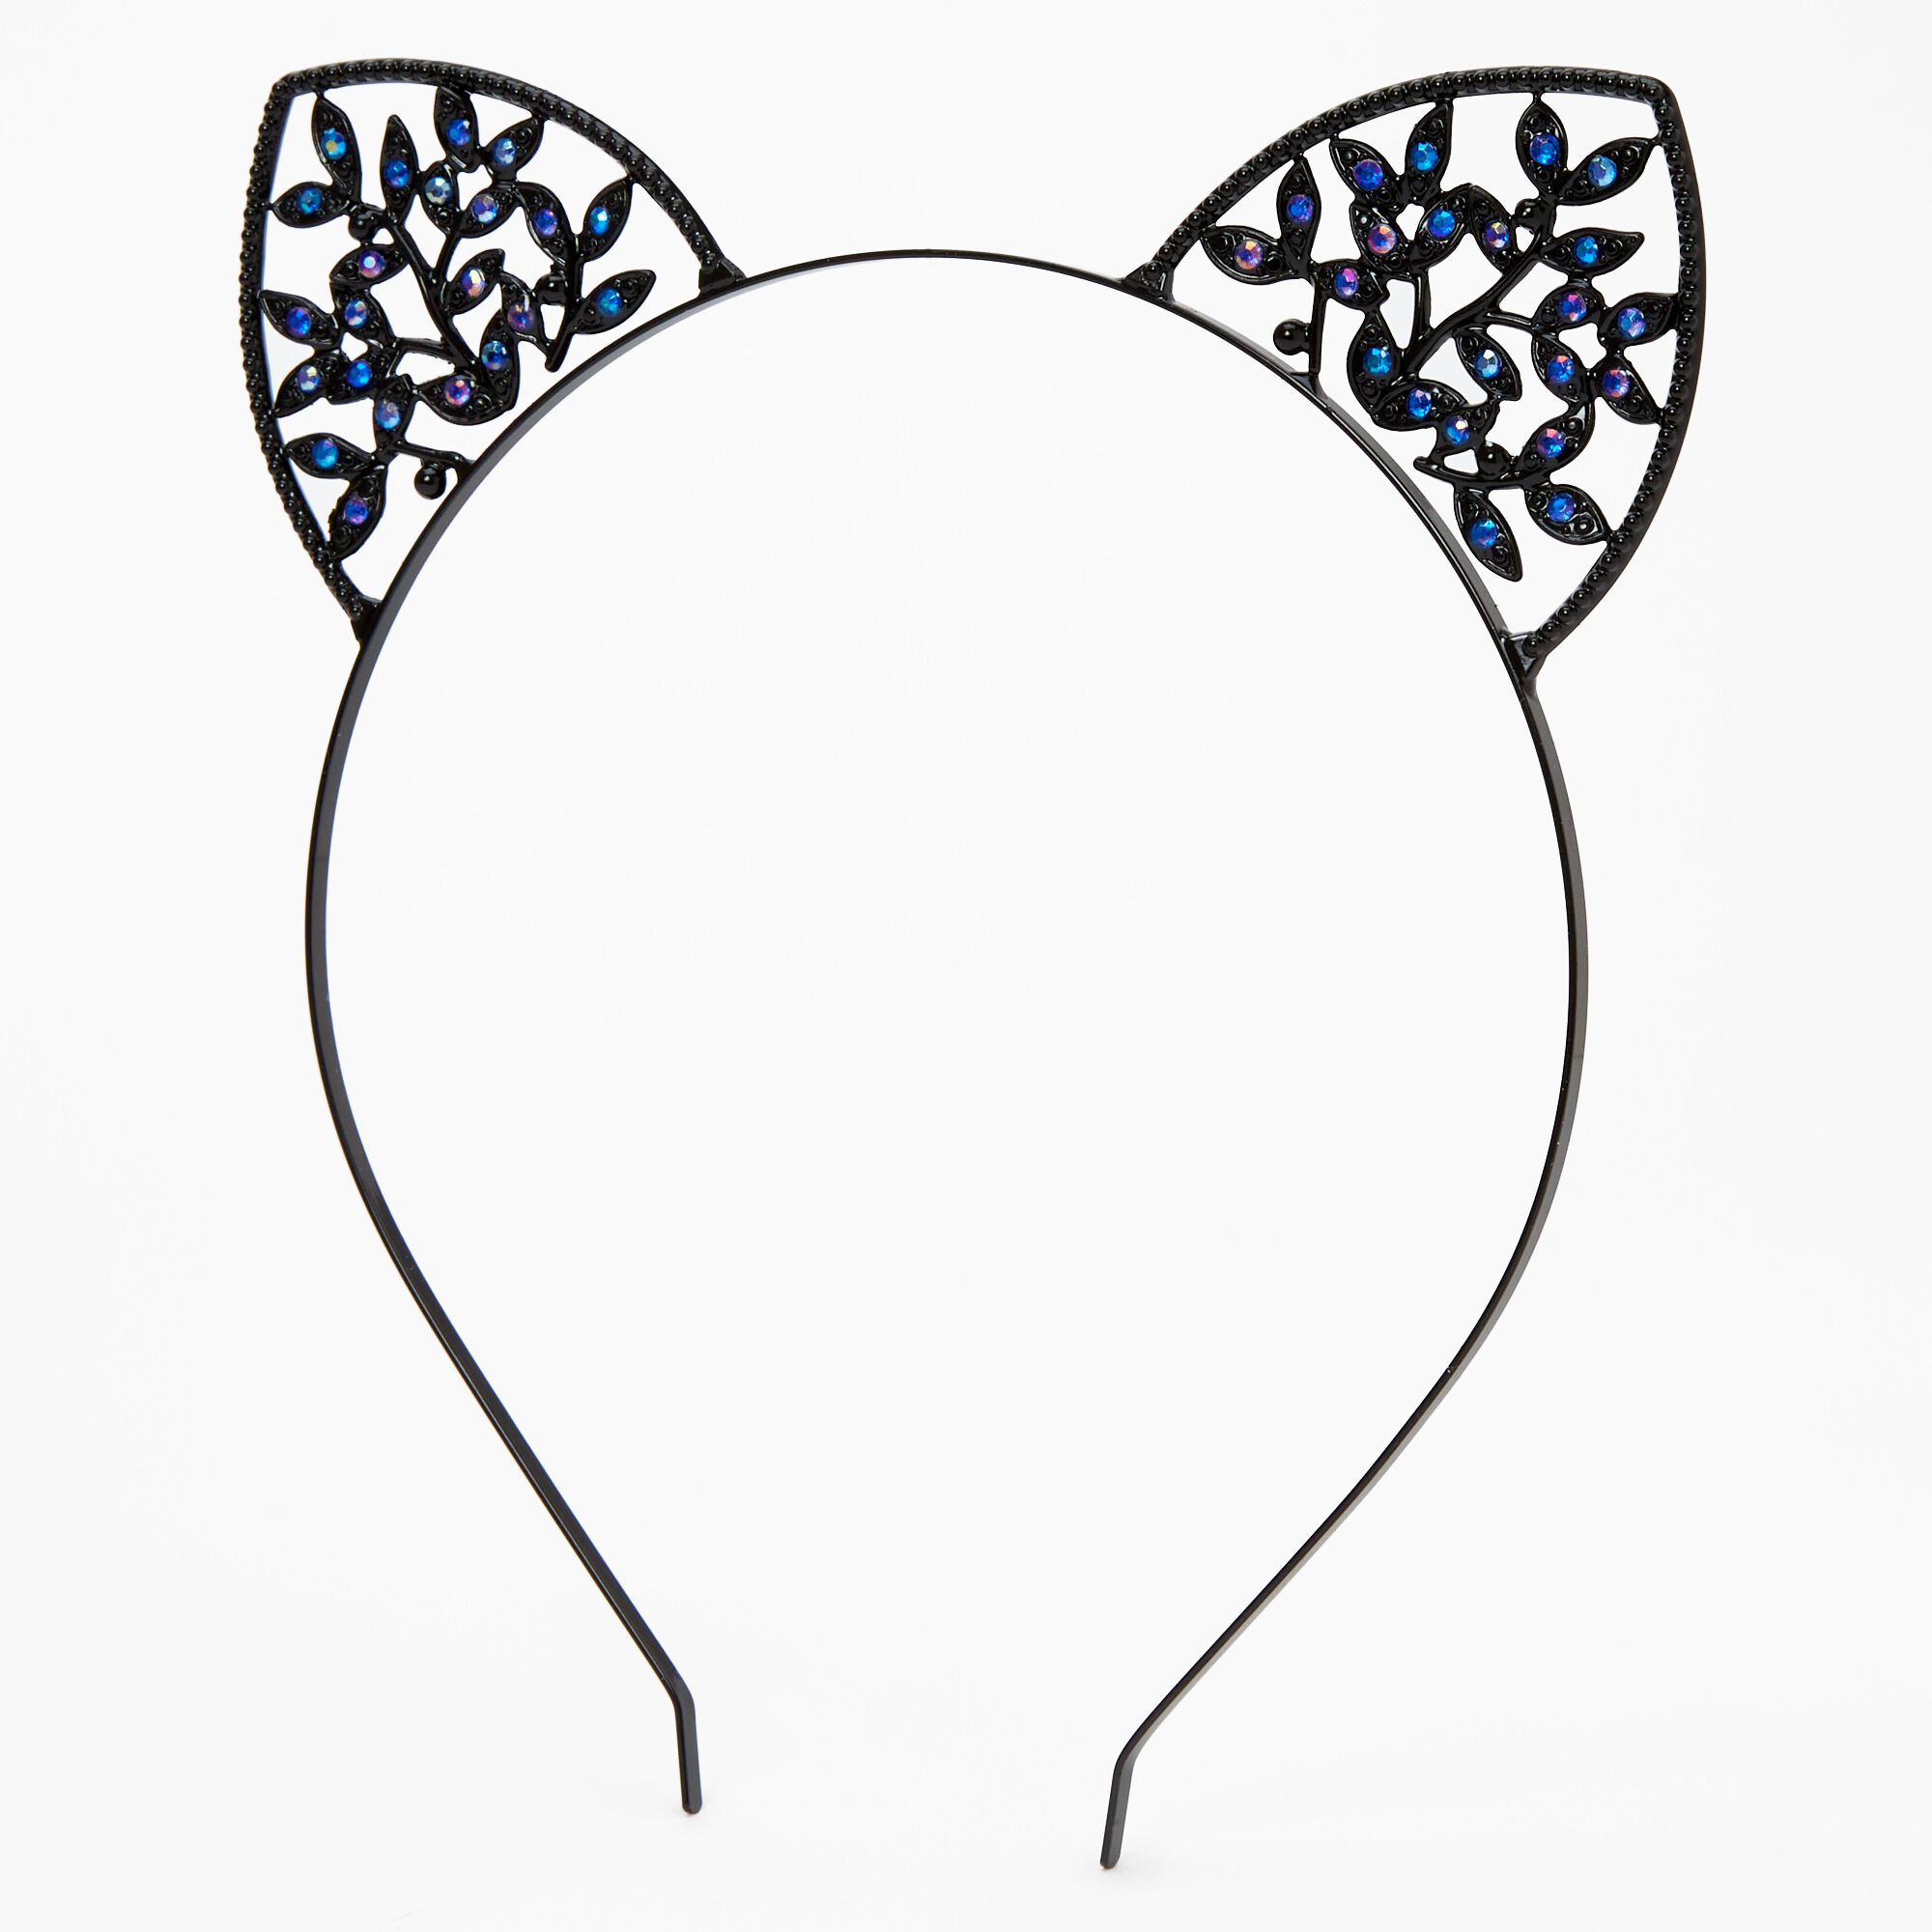 View Claires Ivy Cat Ears Headband Black information